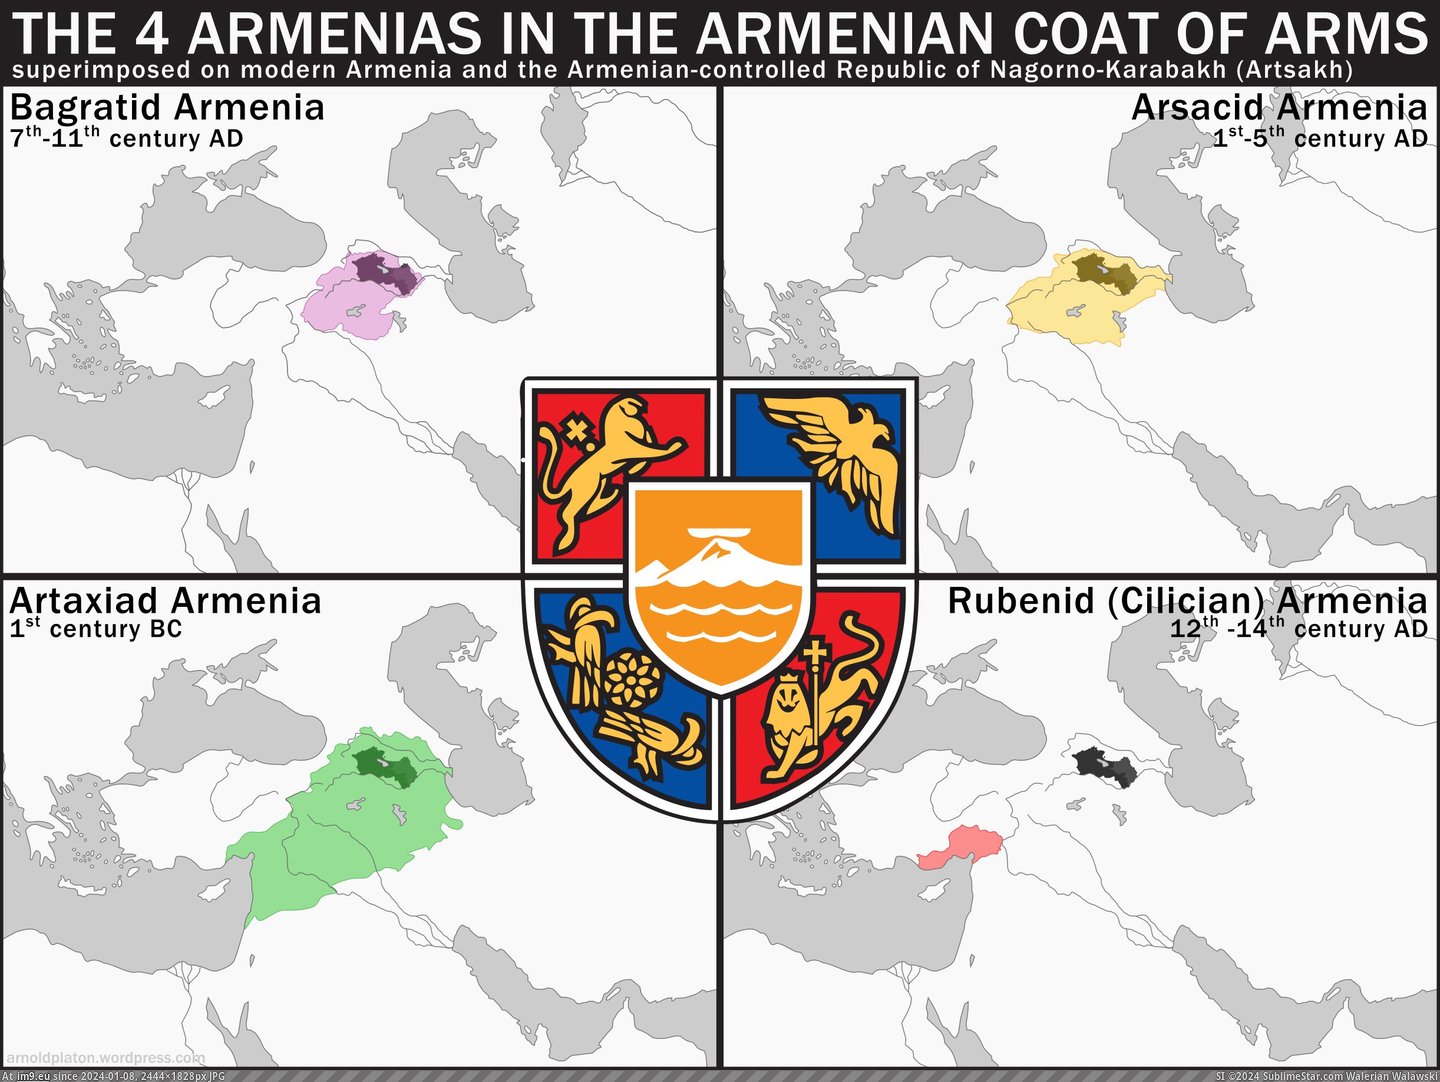 #States #Arms #Armenia #Superimposed #Coat #Armenian [Mapporn] The 4 Armenian states referenced in the Coat of Arms of Armenian (superimposed on Armenia and the unrecognized Nagorno Pic. (Image of album My r/MAPS favs))